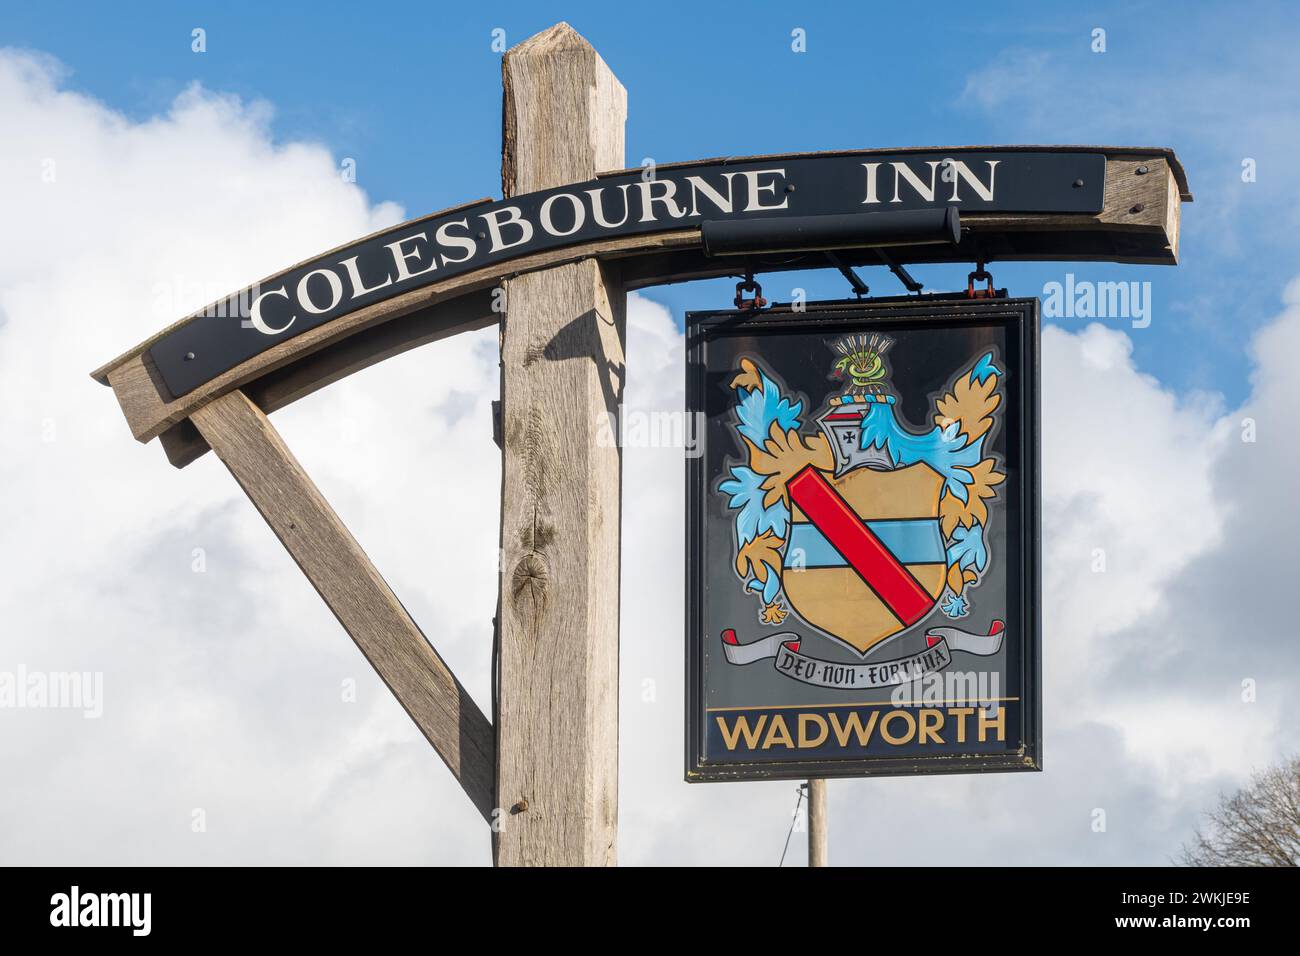 Colesbourne Inn pub and dining in the cotswolds village of Colesbourne, Gloucestershire, England, UK. Pub sign, Wadworth Stock Photo